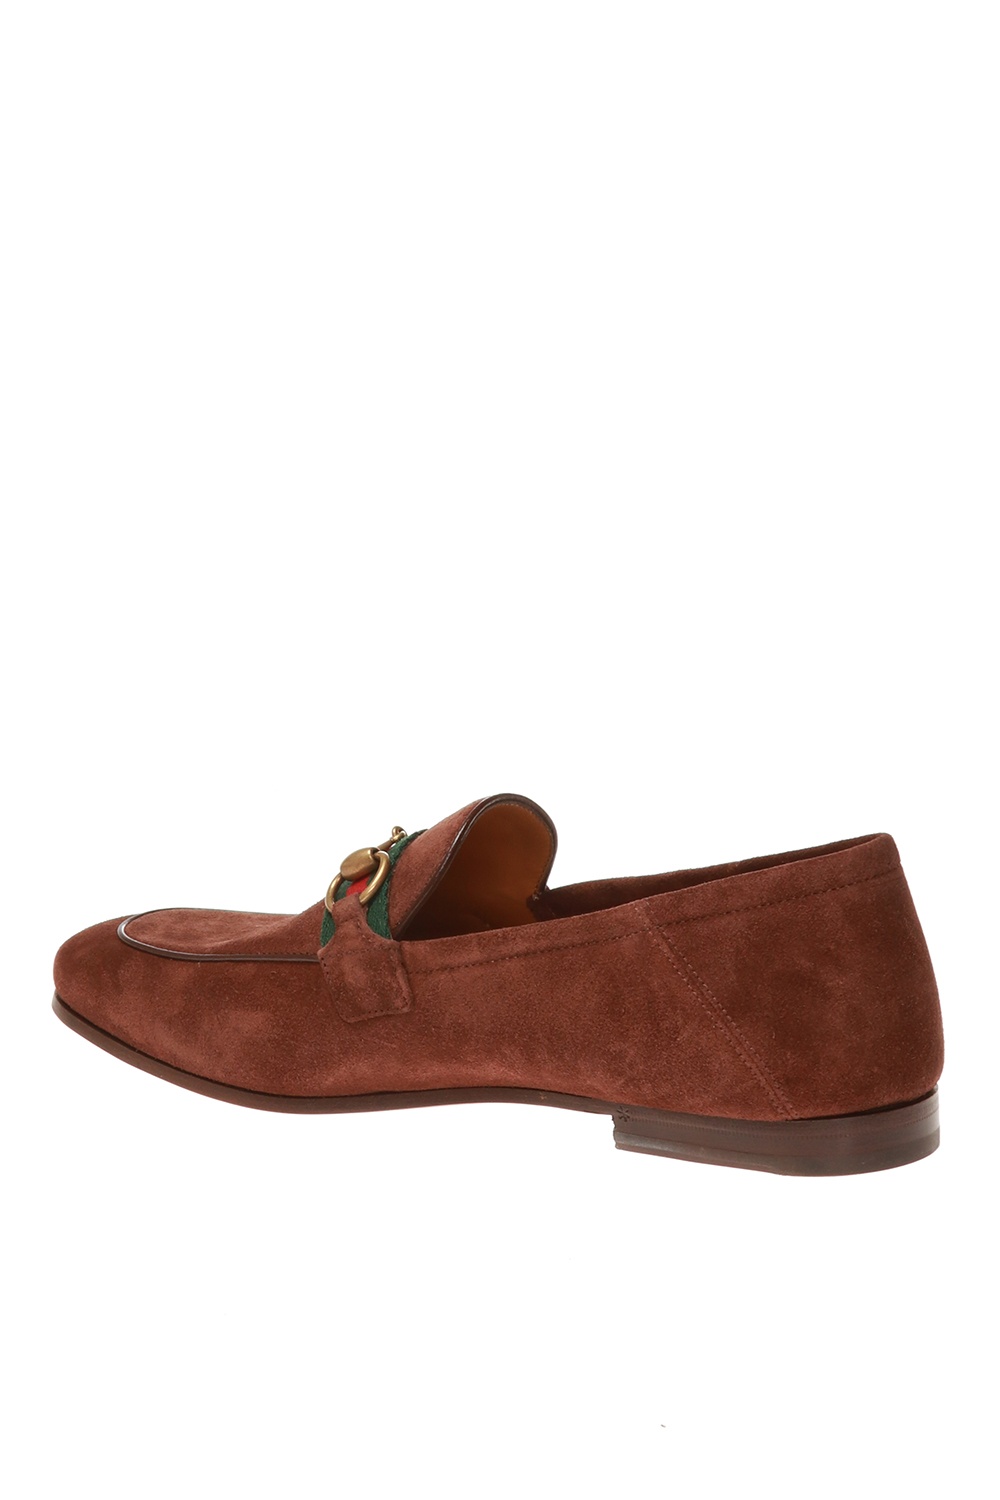 gucci Glasses Suede loafers